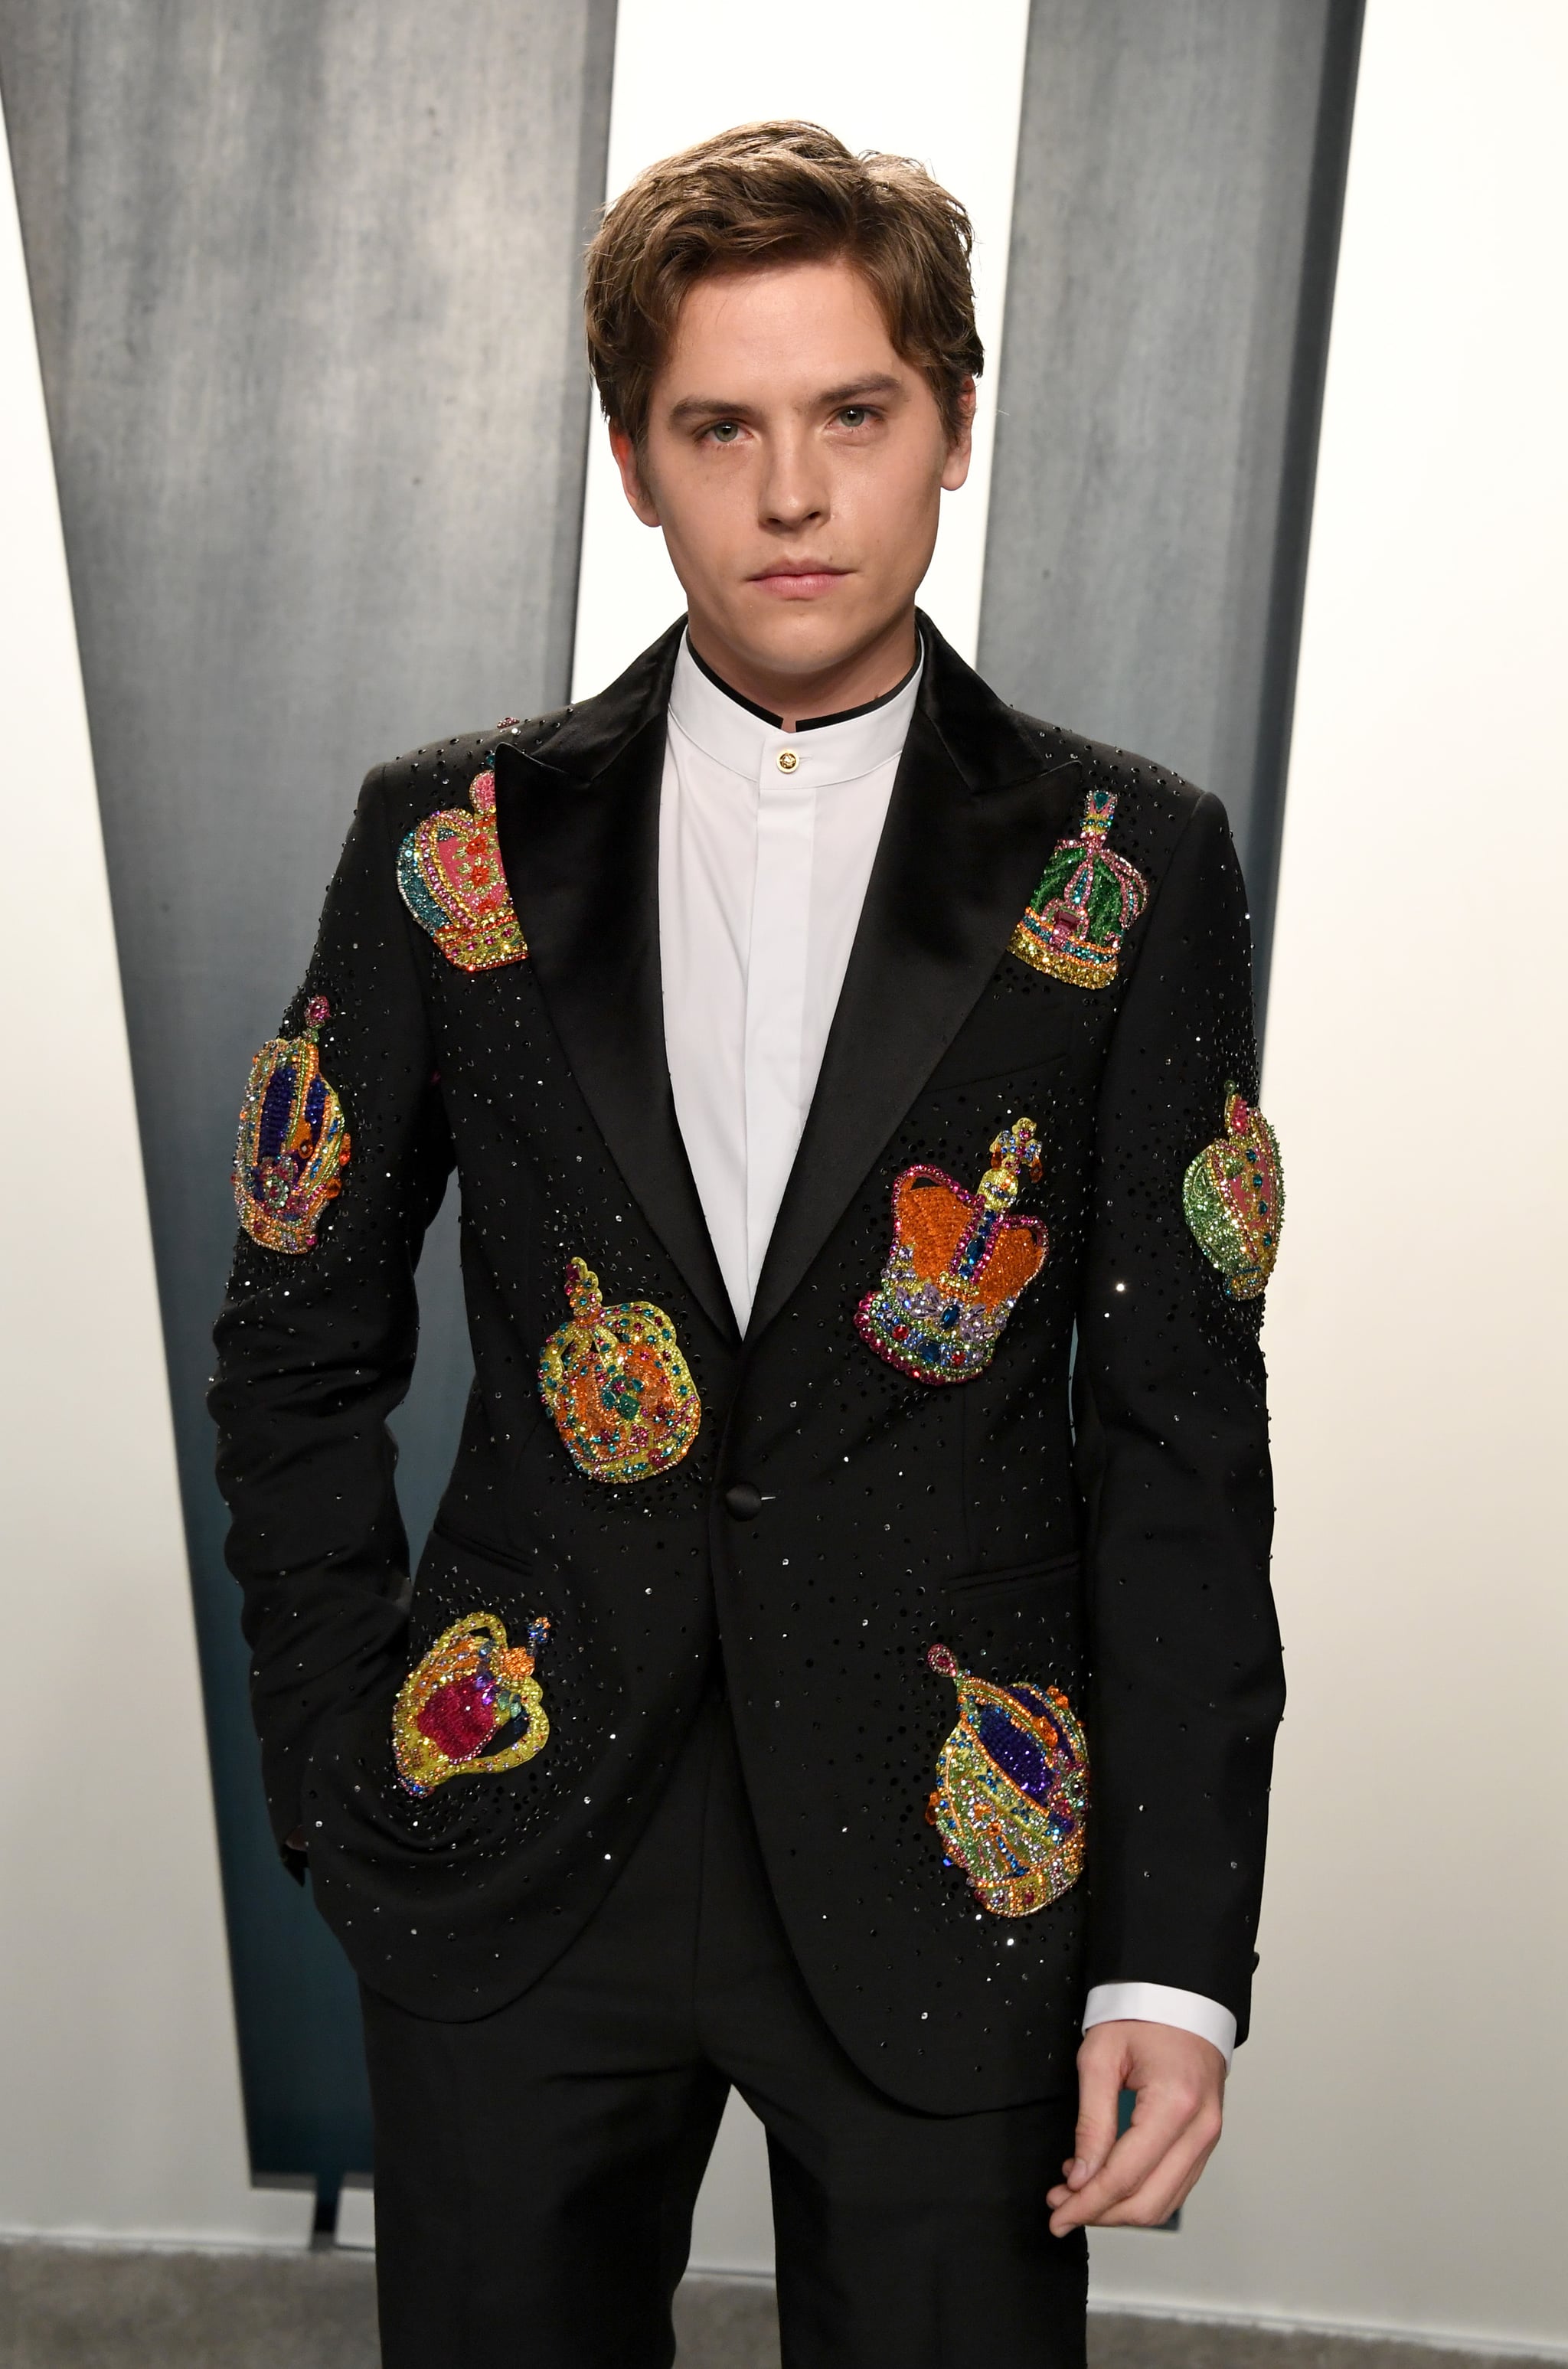 BEVERLY HILLS, CALIFORNIA - FEBRUARY 09: Dylan Sprouse attends the 2020 Vanity Fair Oscar Party hosted by Radhika Jones at Wallis Annenberg Center for the Performing Arts on February 09, 2020 in Beverly Hills, California. (Photo by Jon Kopaloff/WireImage)